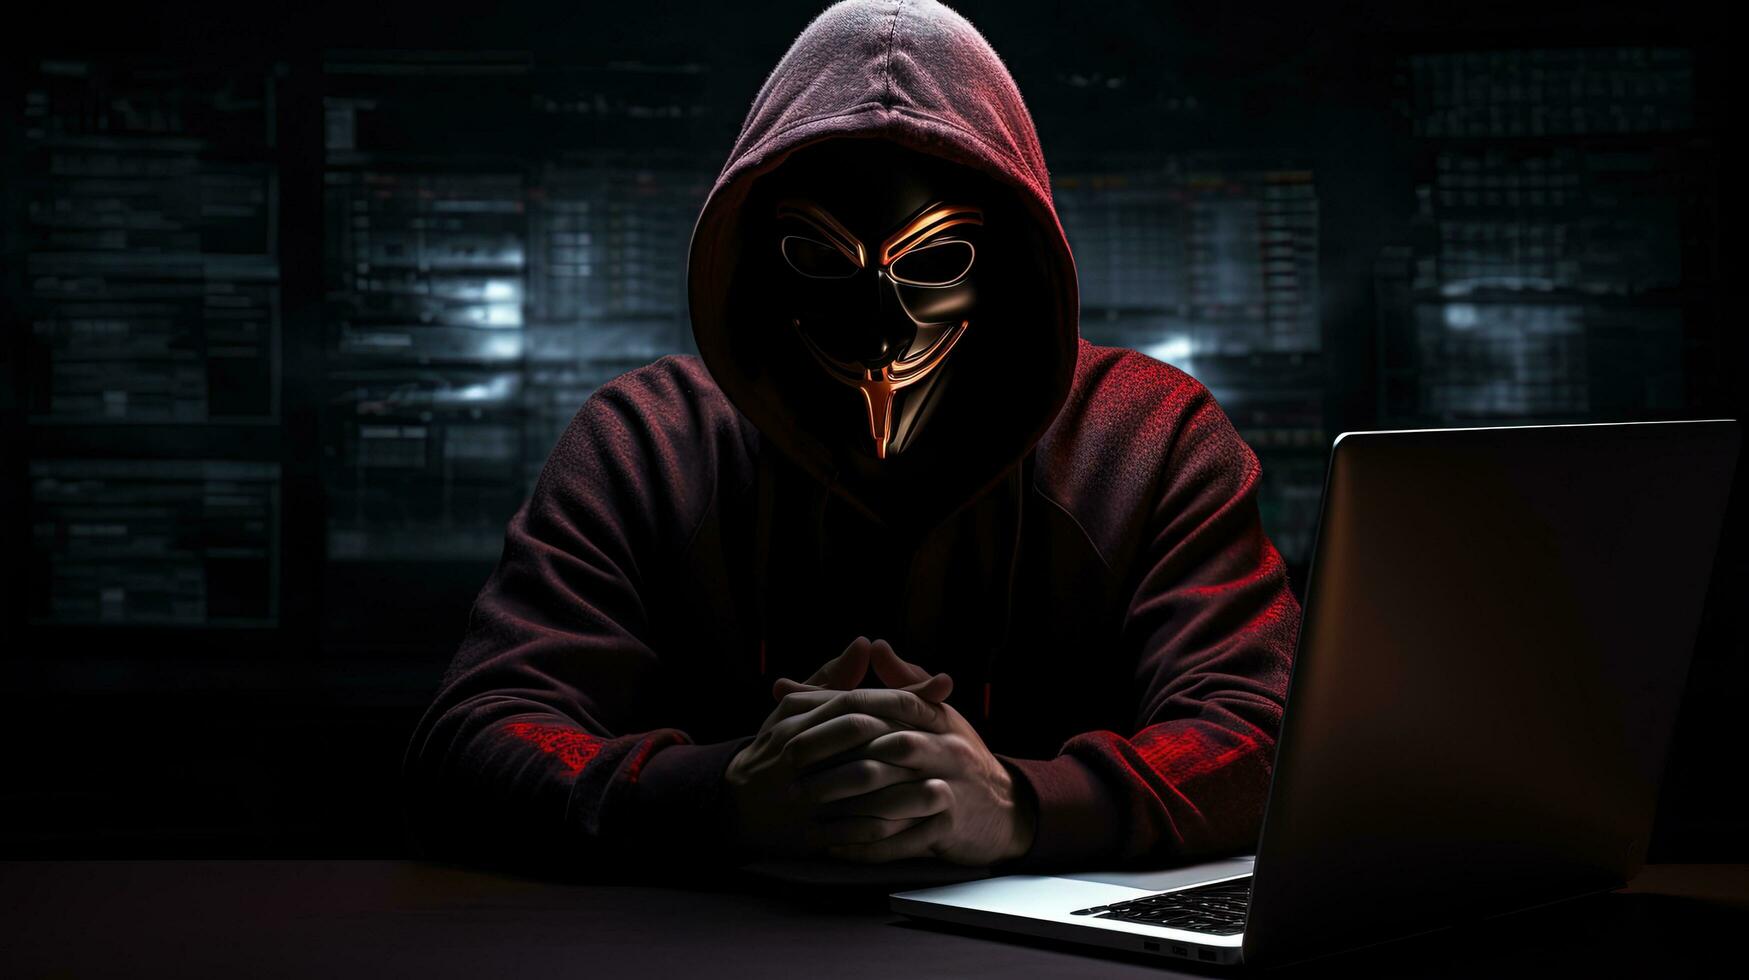 Anonymous dark figure with boxing gloves engaging in cyber crime and malware activities with a focus on internet hacking and system disruption. silhouette concept photo